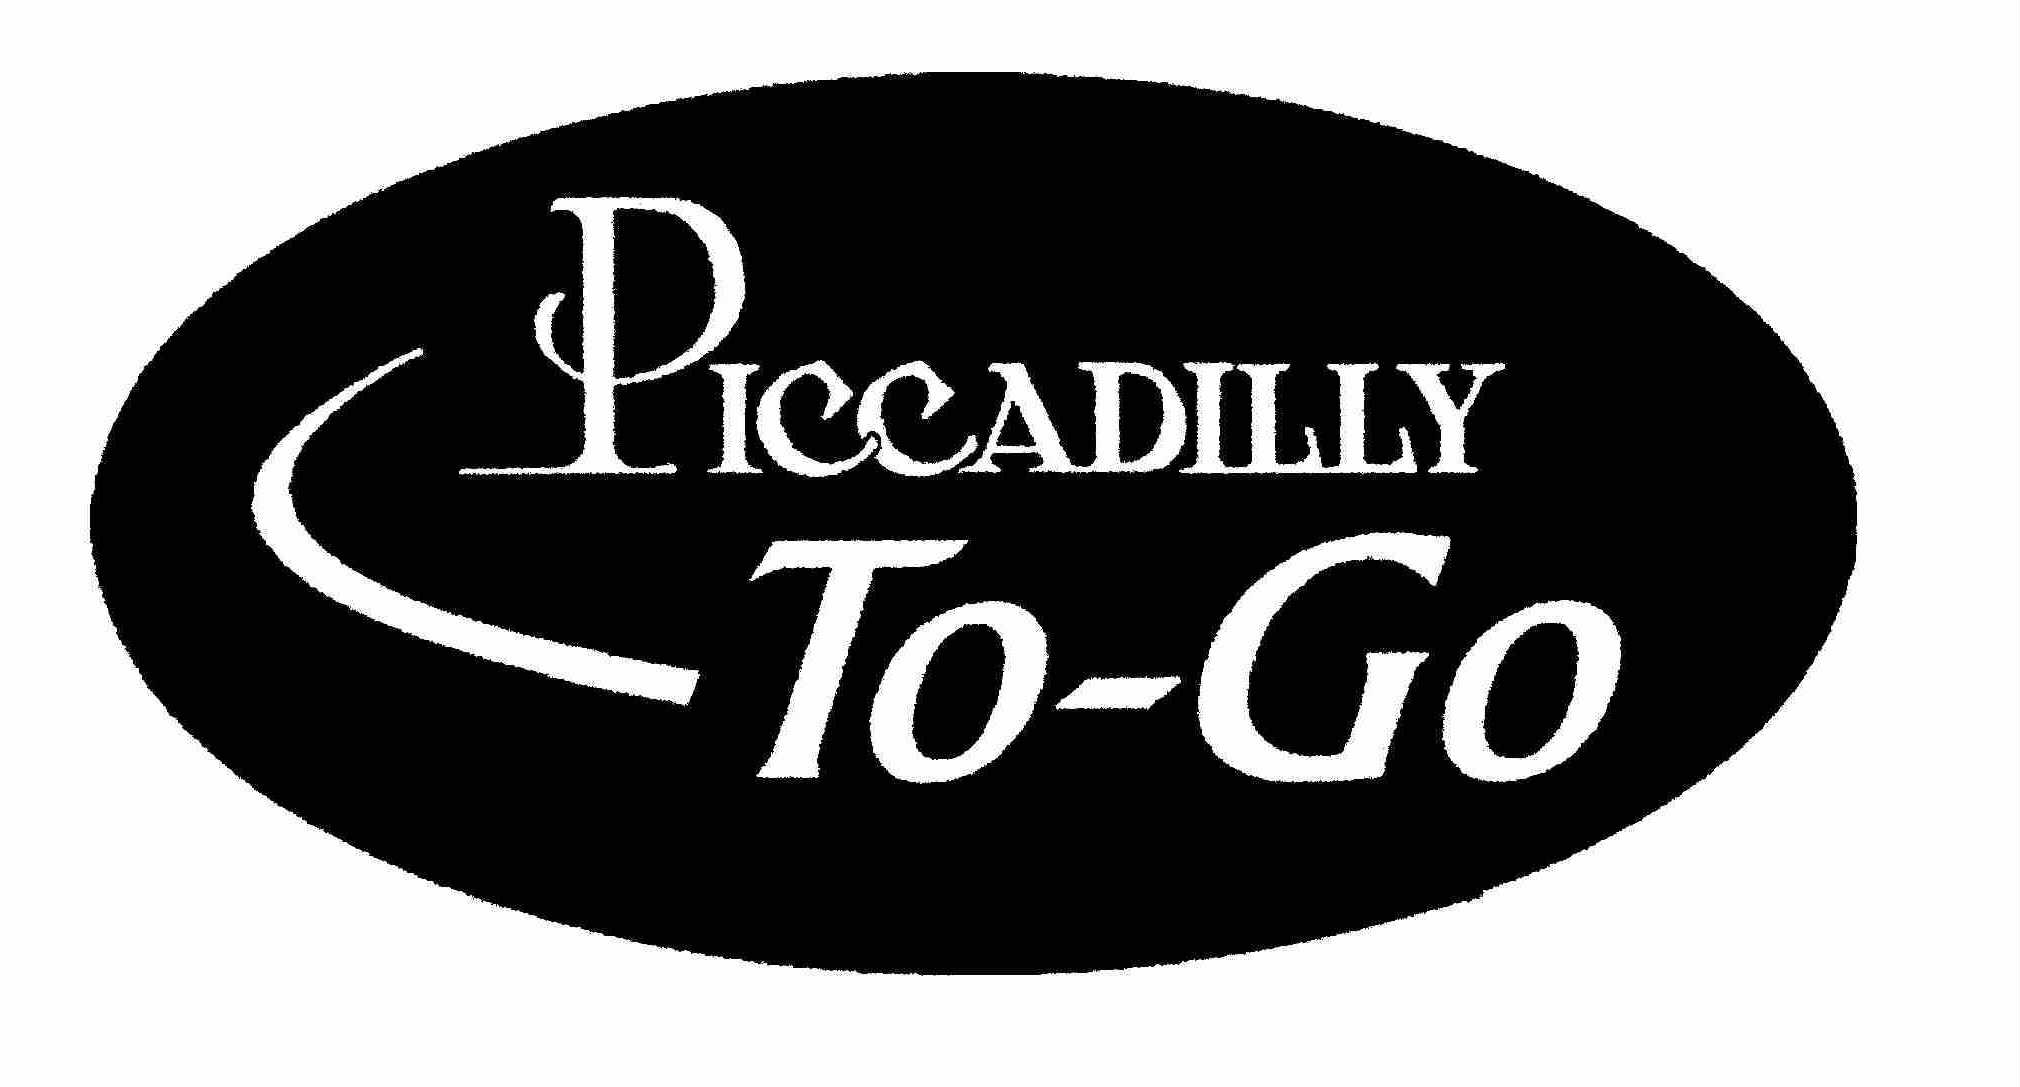  PICCADILLY TO-GO